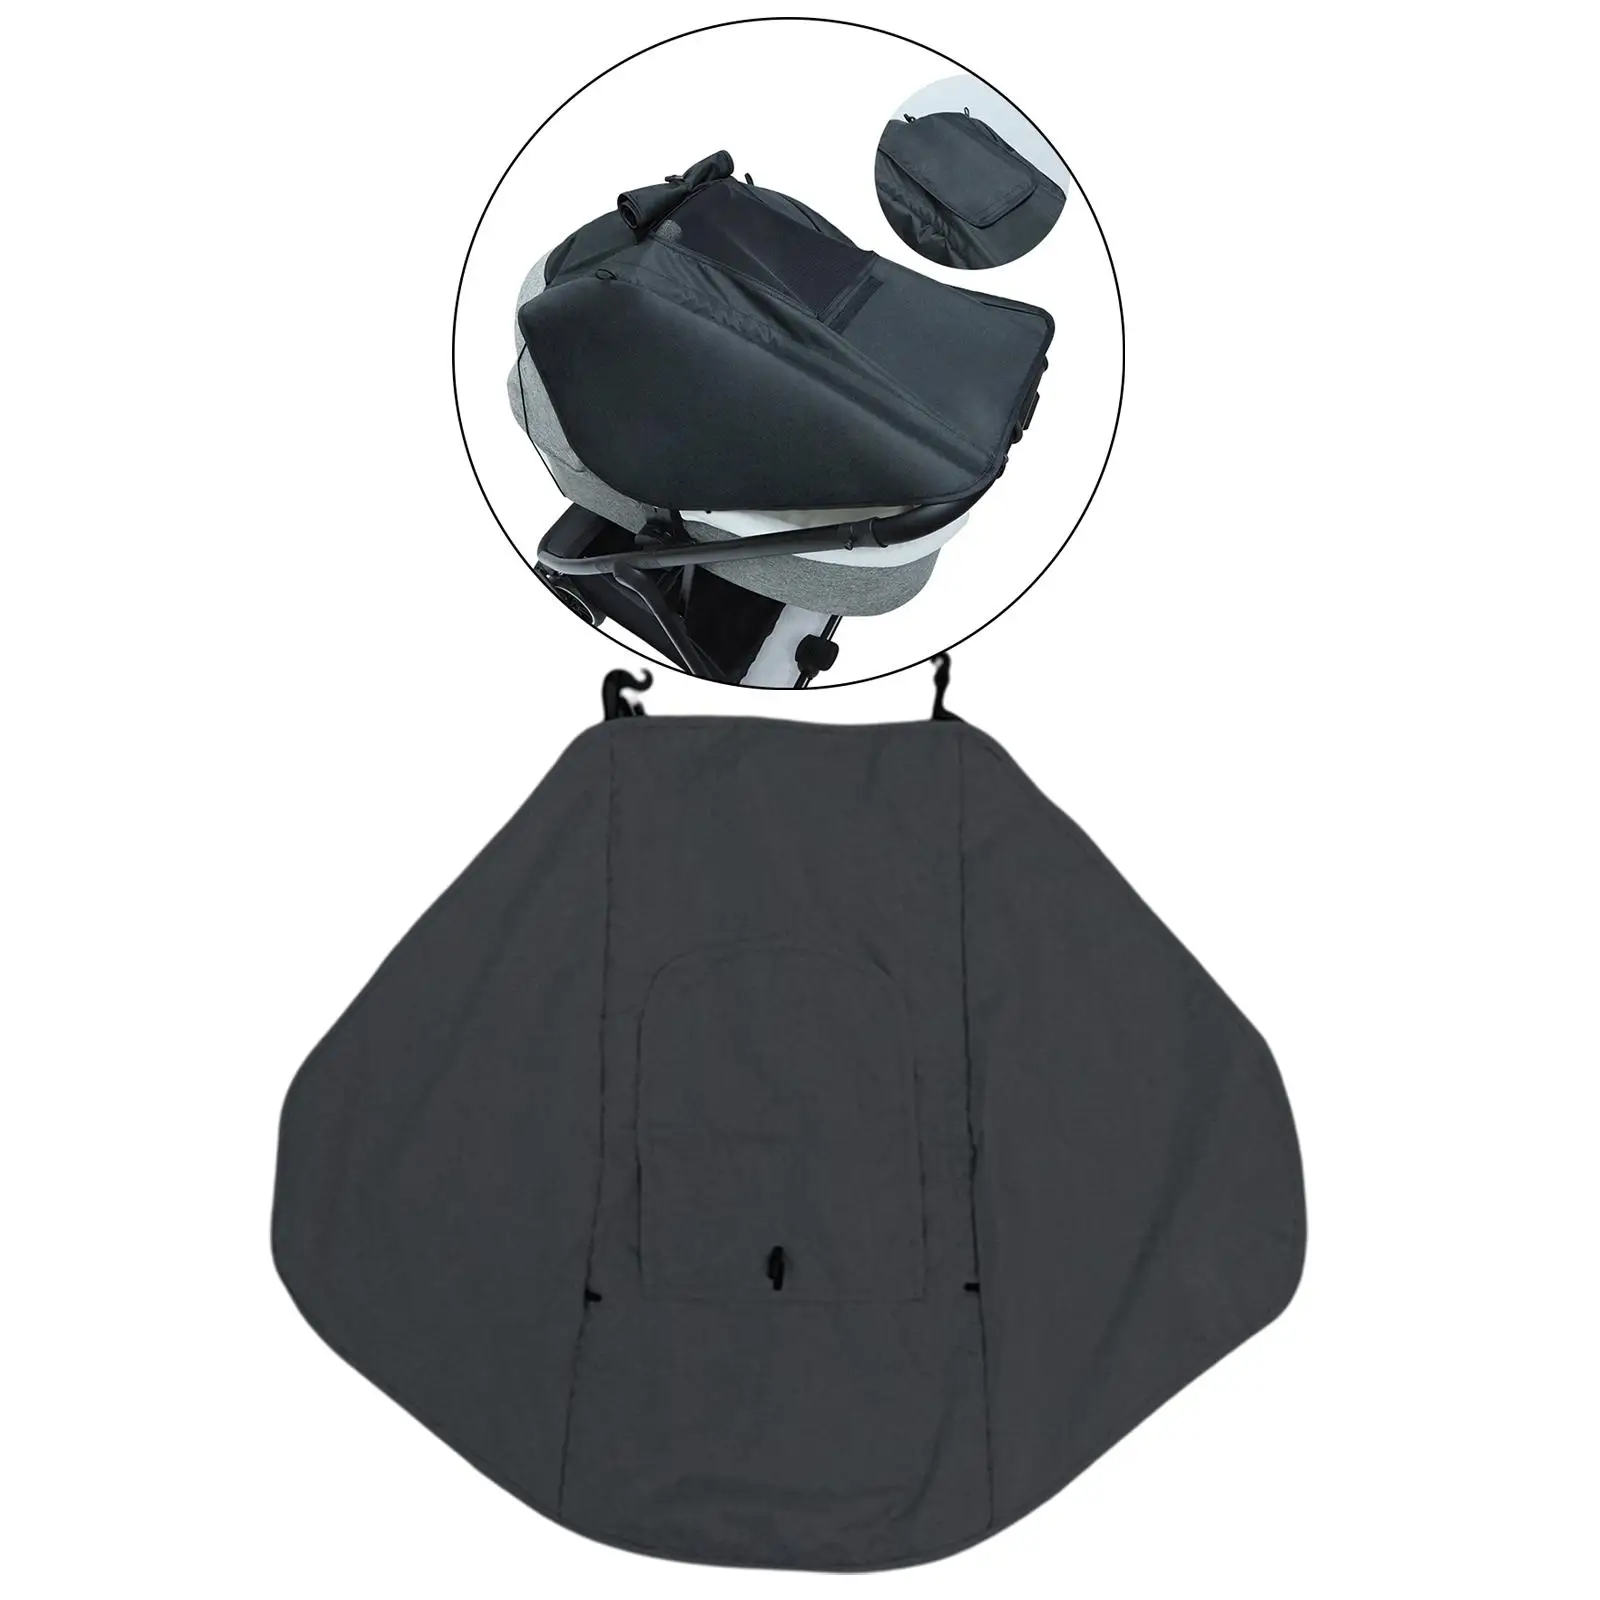 Durable Stroller sun shade Adjustable with Viewing Window for Pram Infants